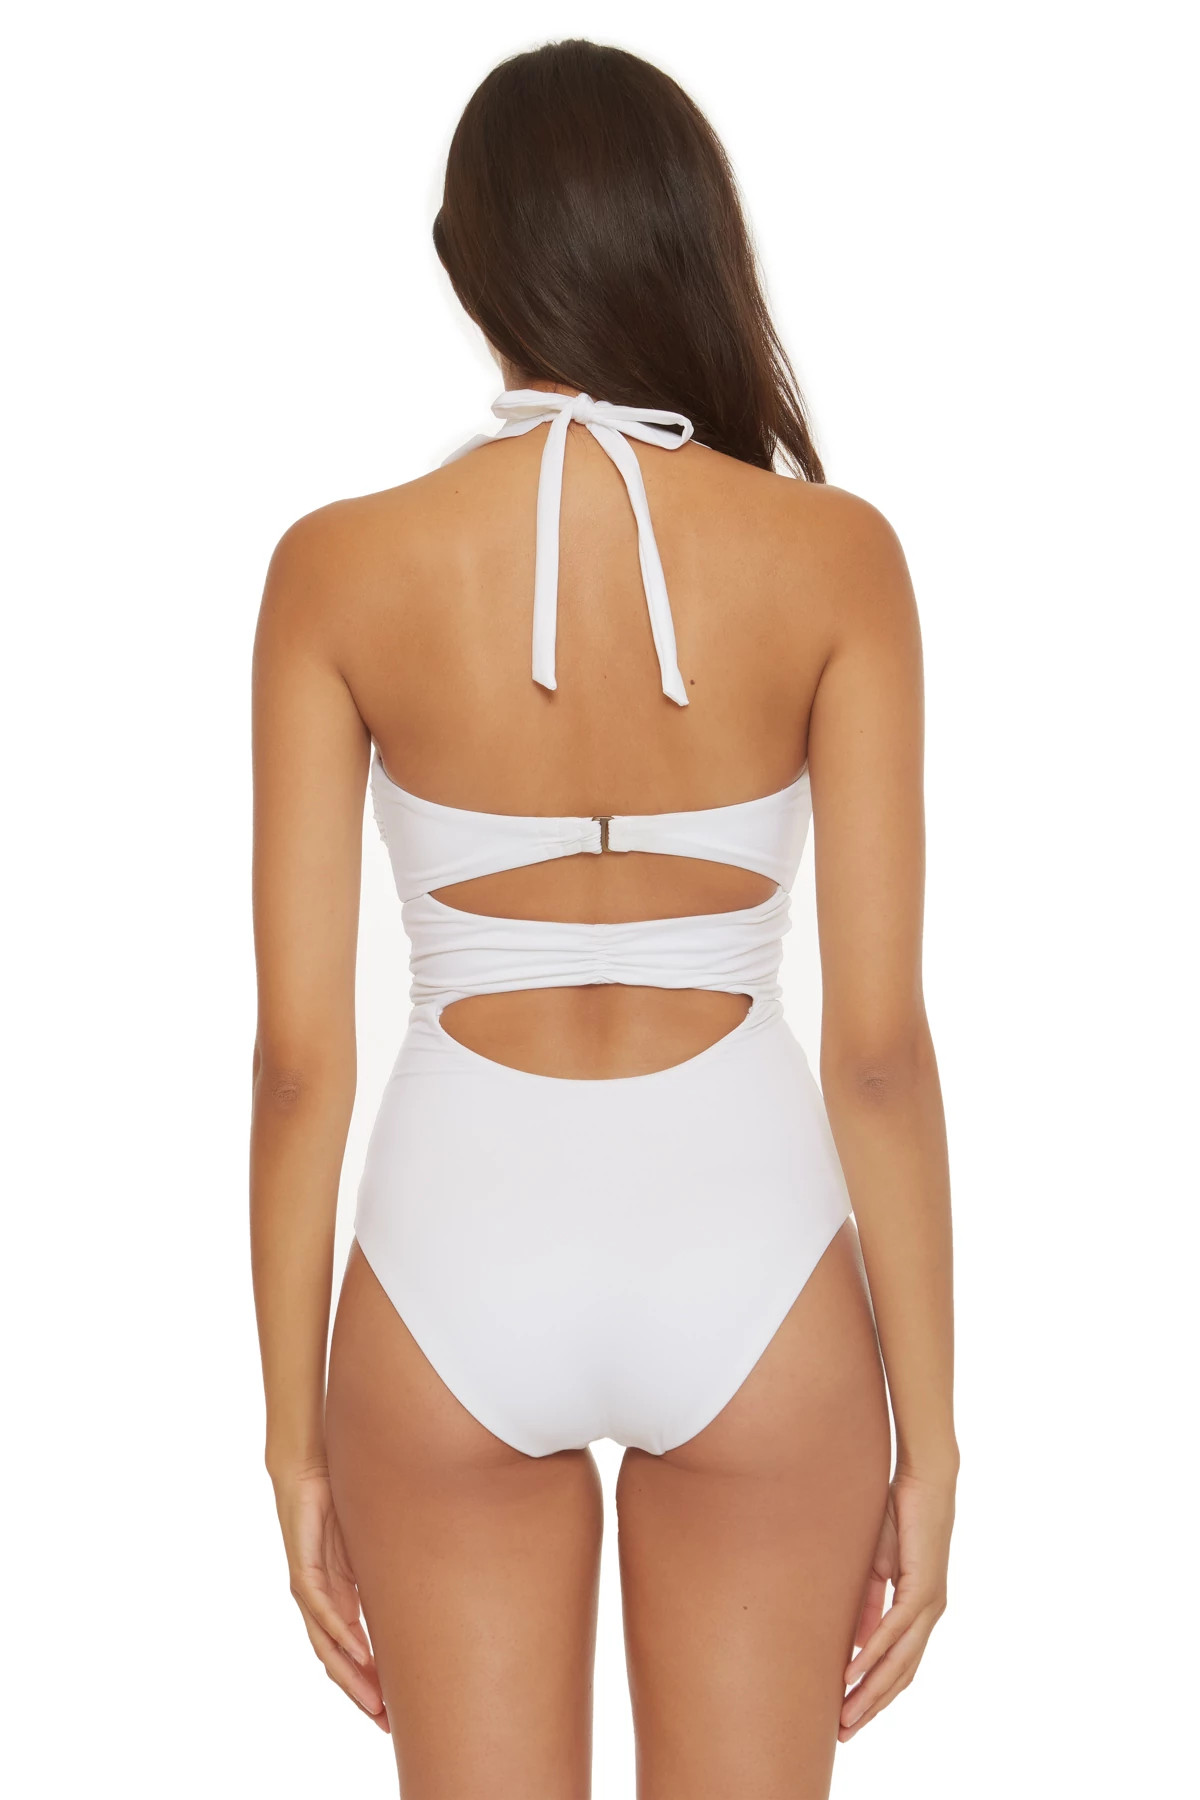 WHITE Ruffle One Piece Swimsuit image number 3